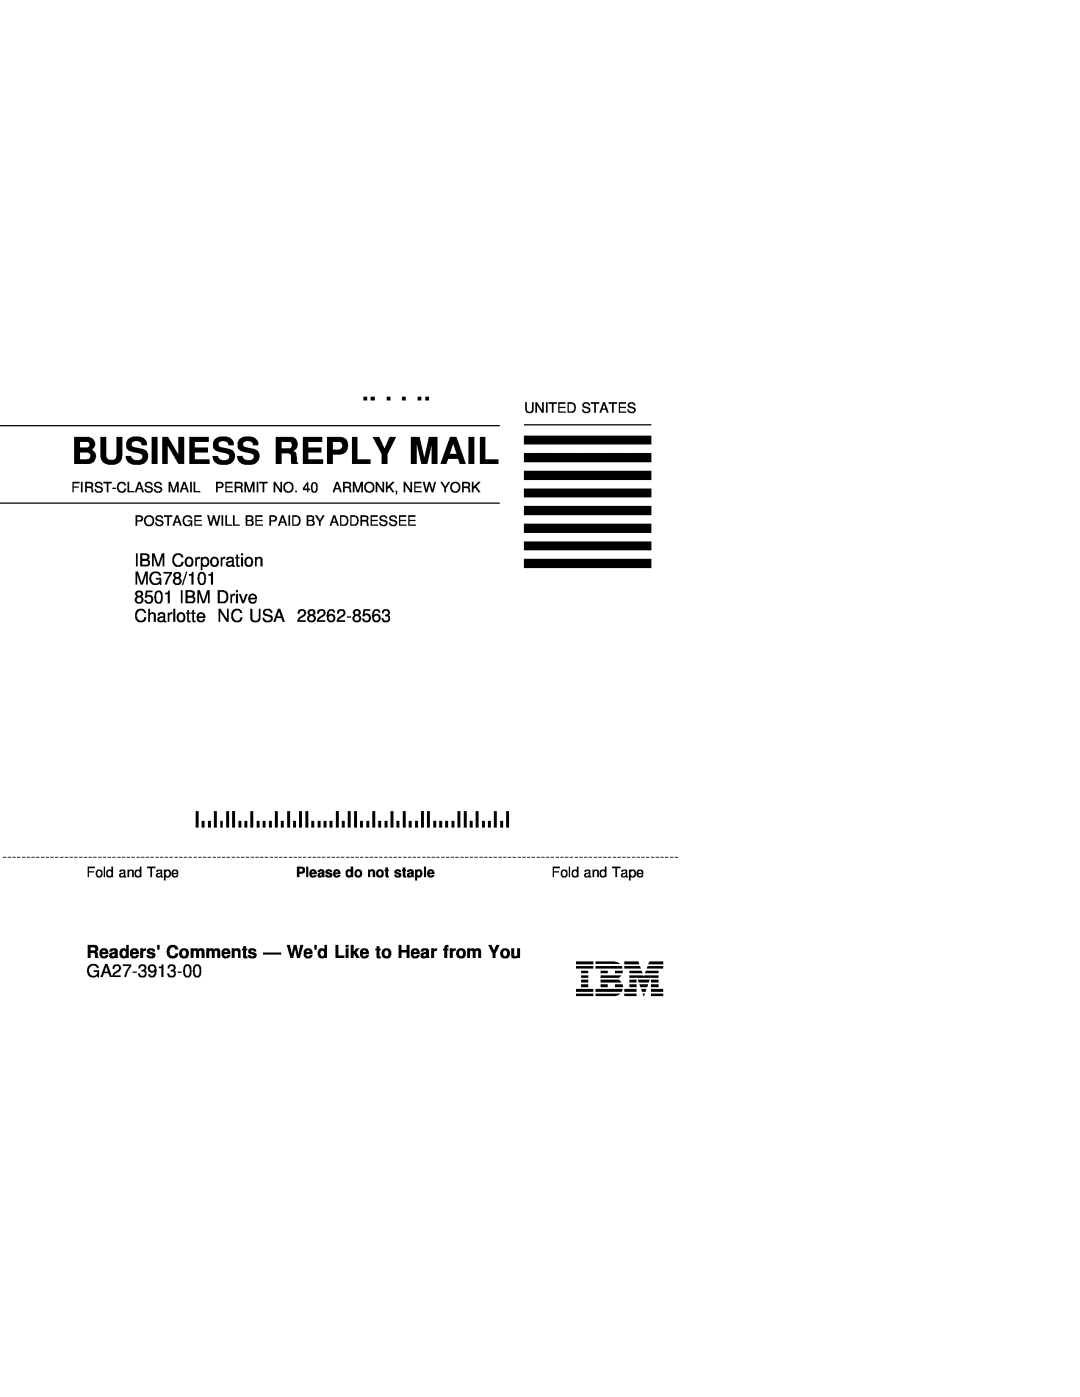 IBM 3270 manual Readers Comments - Wed Like to Hear from You, Business Reply Mail, Postage Will Be Paid By Addressee 